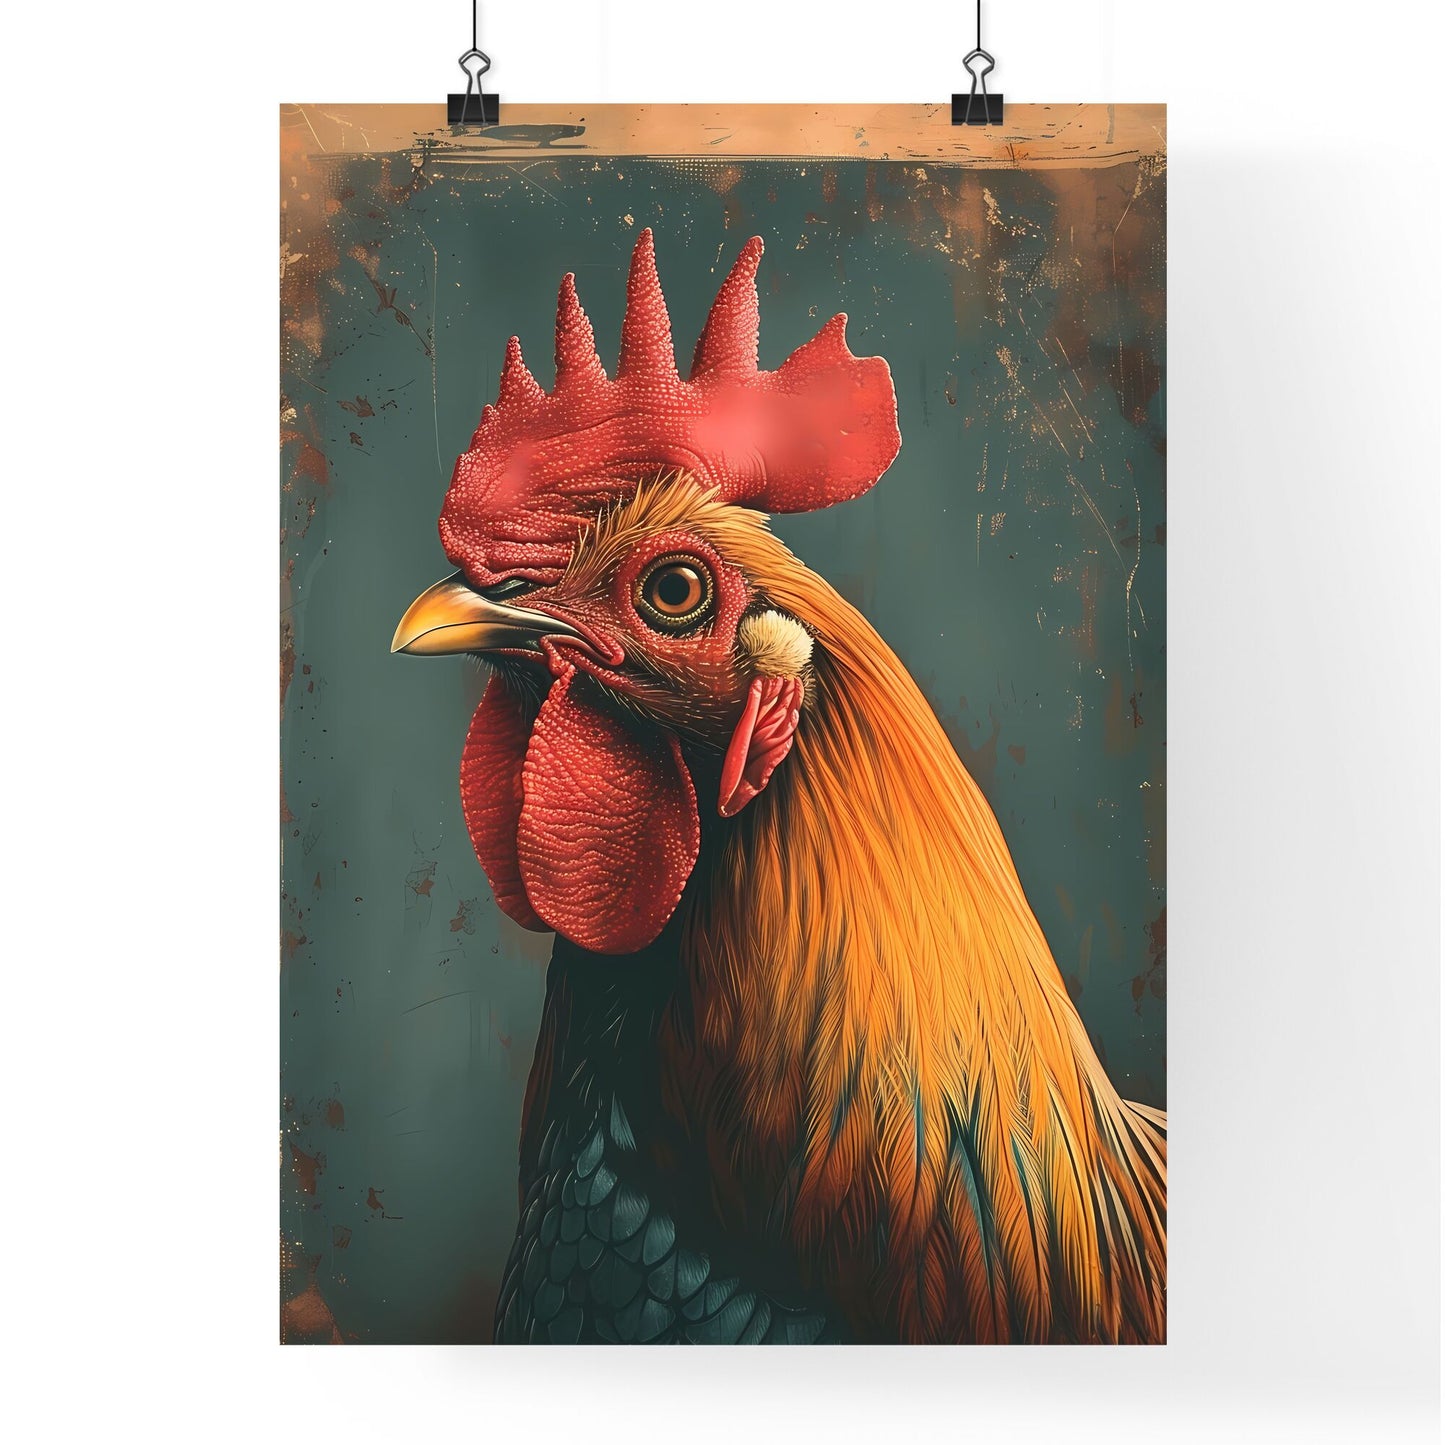 Vibrant Pop-Art Rooster Painting with Crimson Comb Focusing on Artistic Expression Default Title